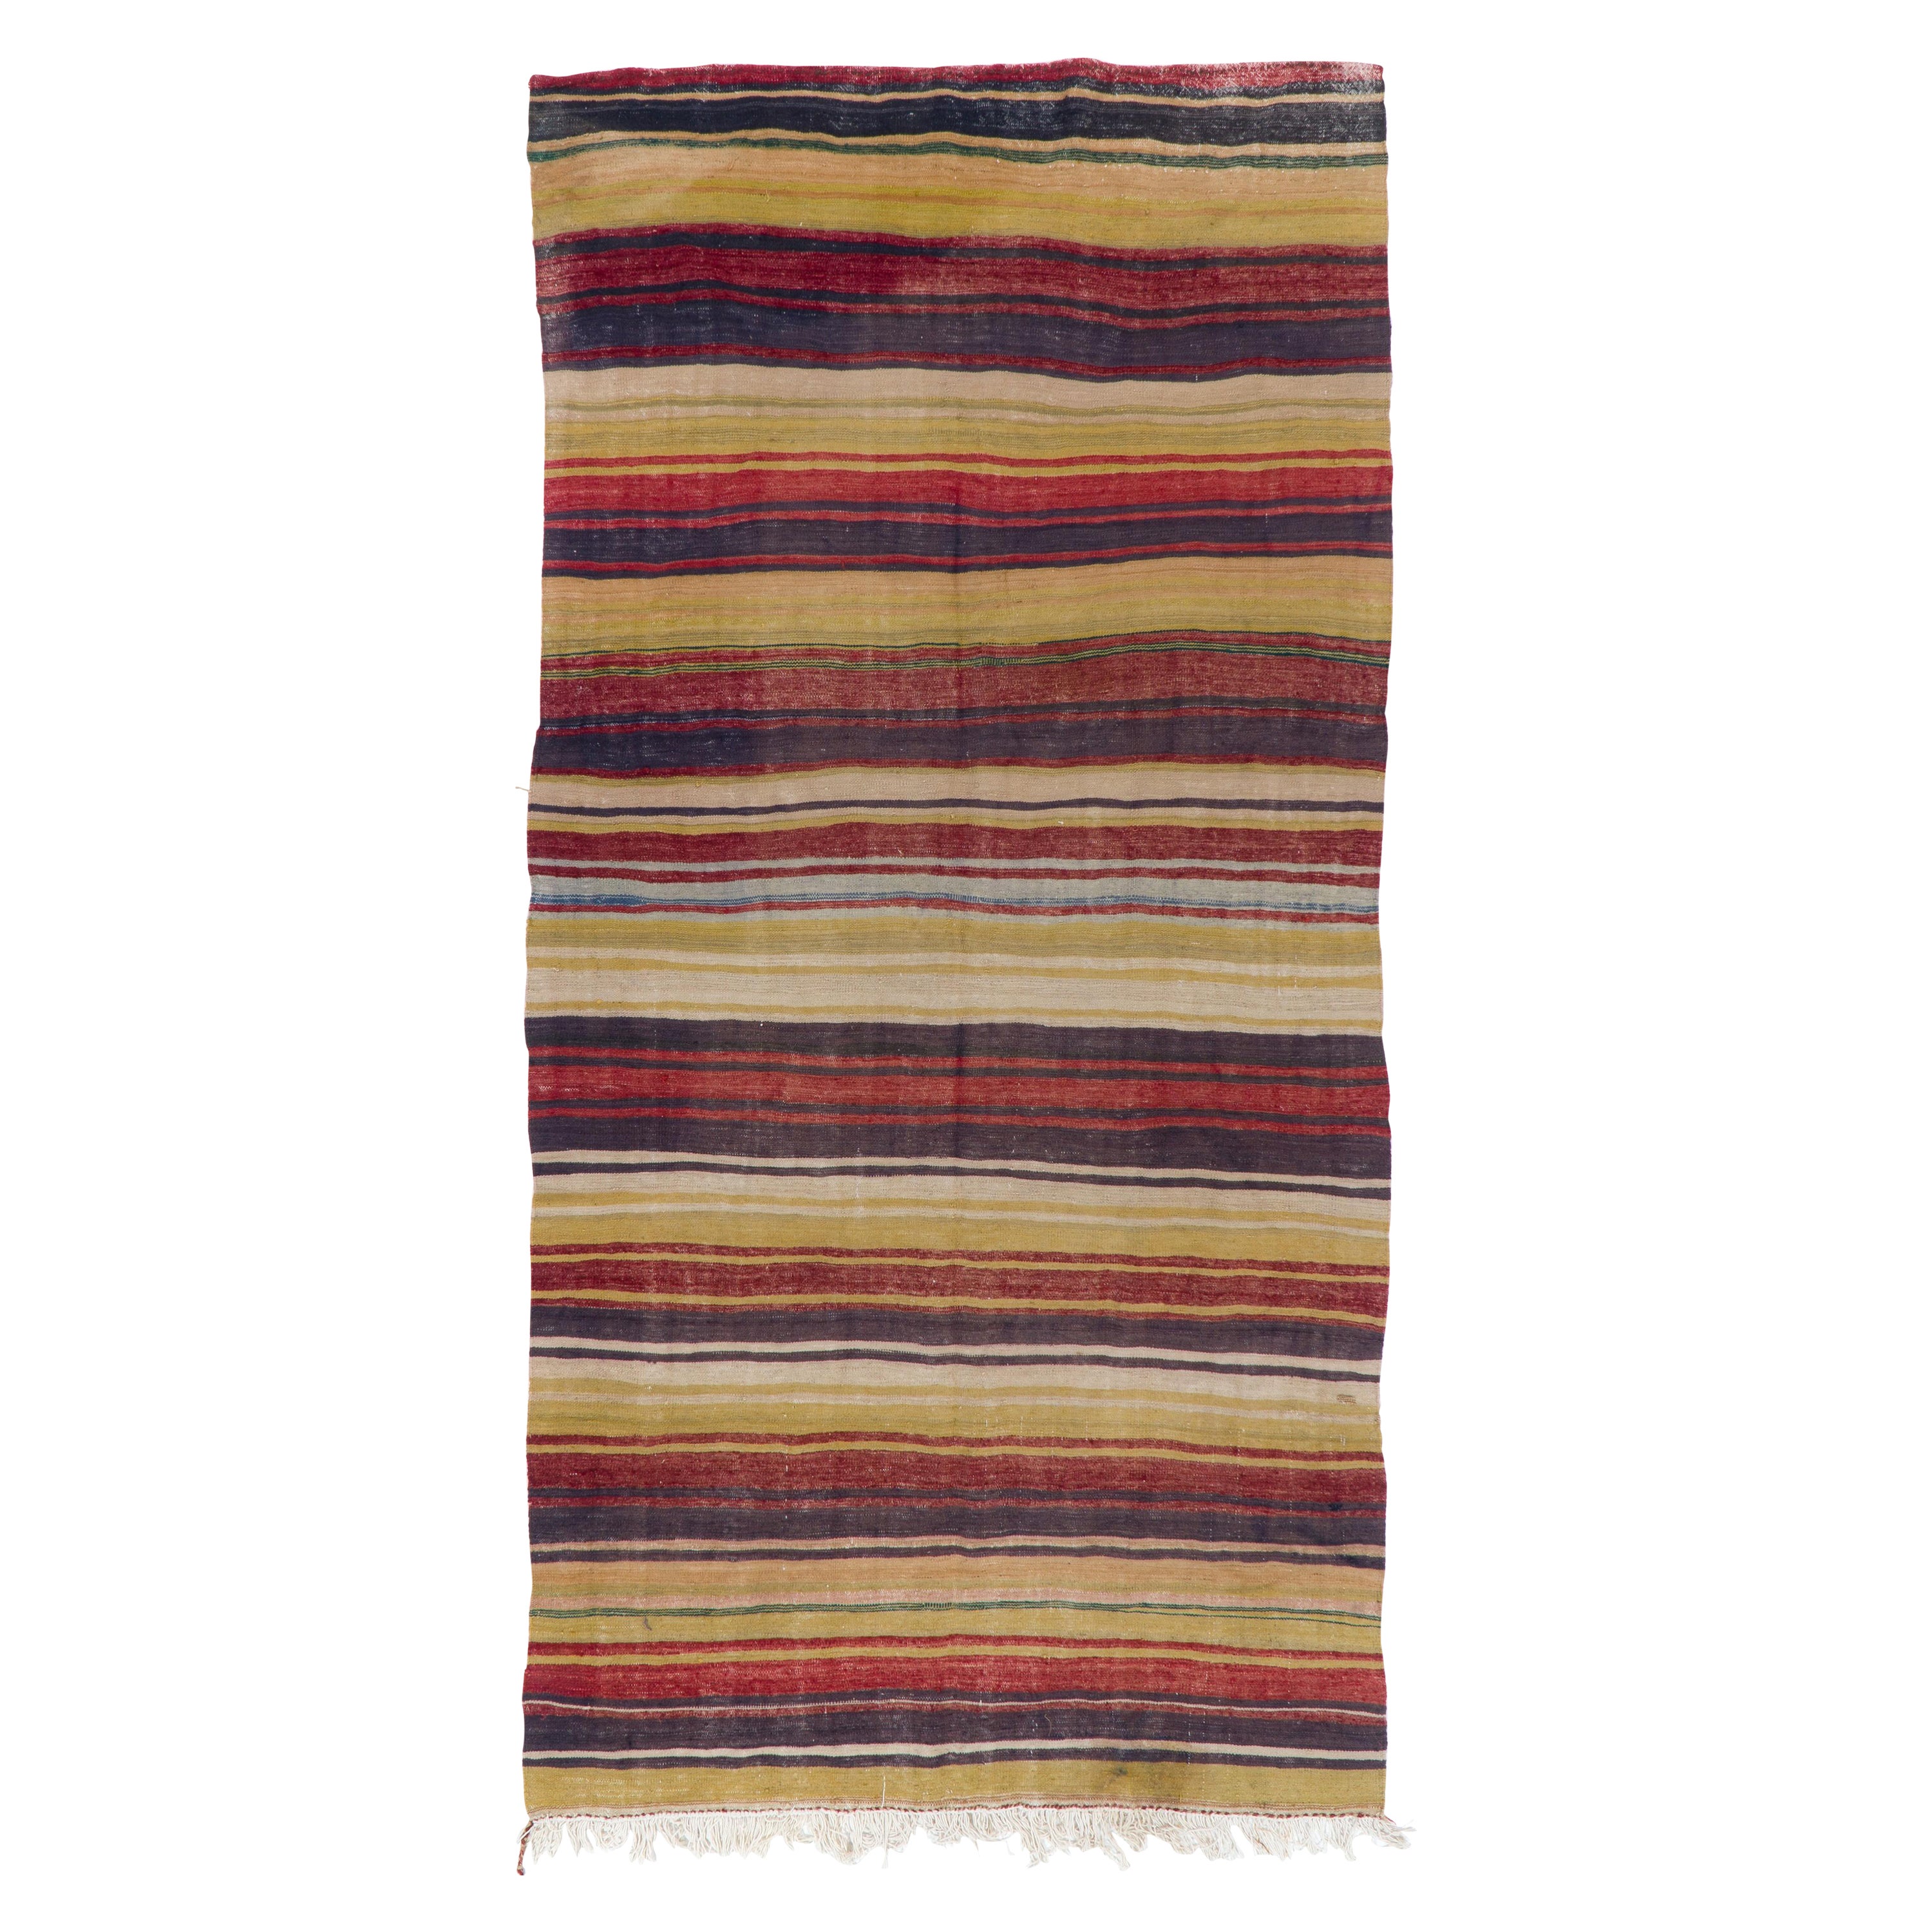 5.2x10.4 ft Hand-Woven Anatolian Runner Kilim "Flat-weave" with Striped Pattern For Sale